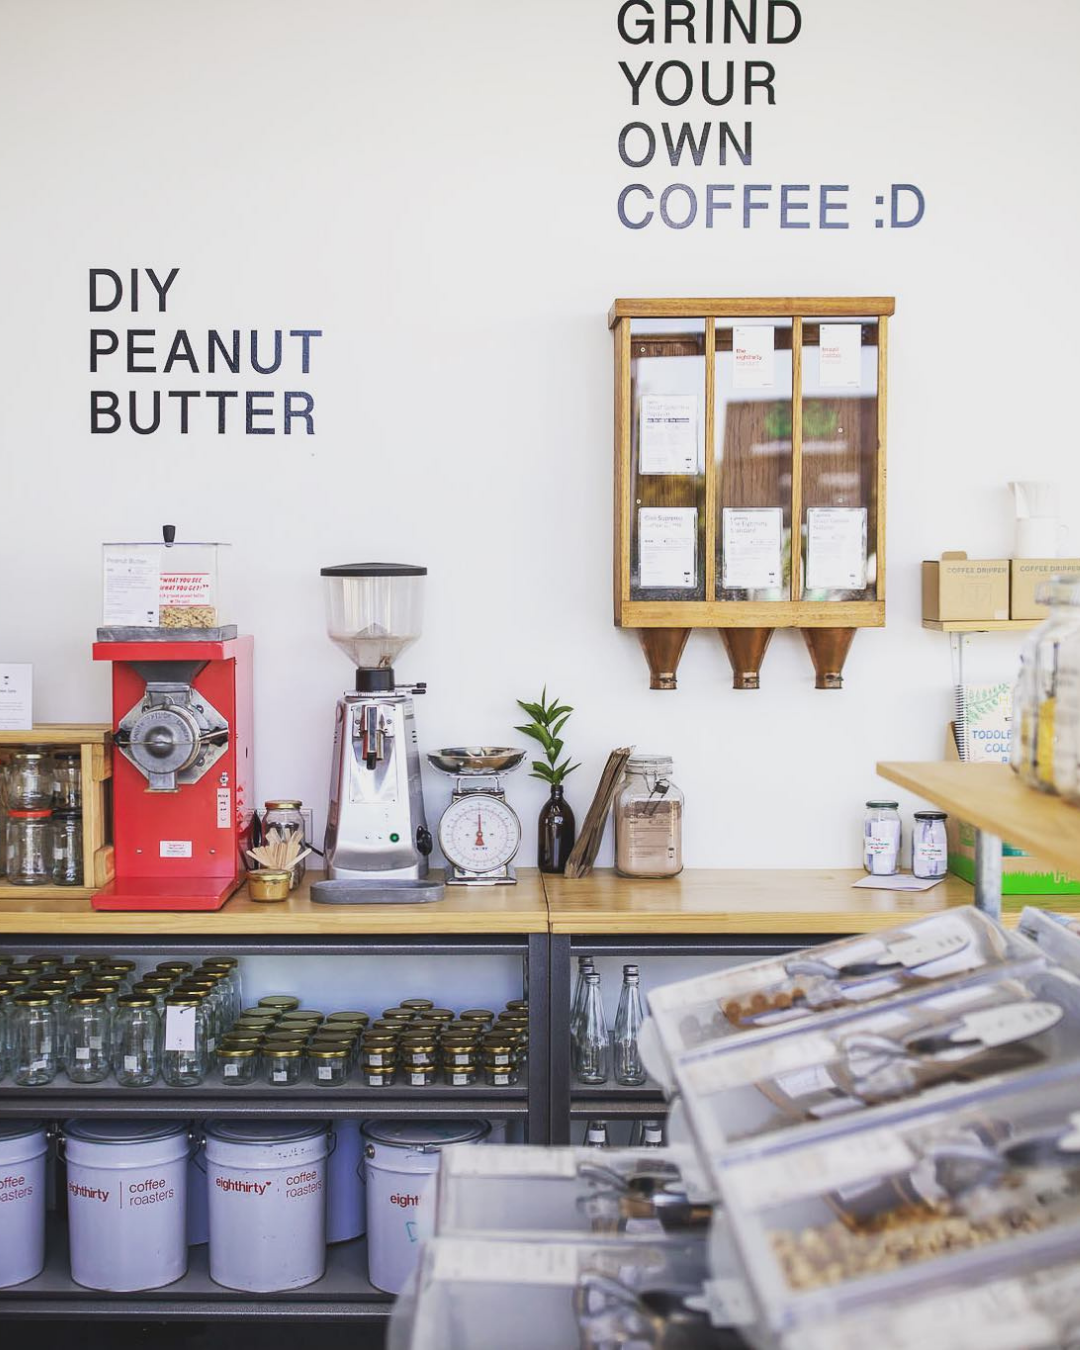 A wall filled with bulk bin goodies including DIY peanut butter and grind-your-own coffee.